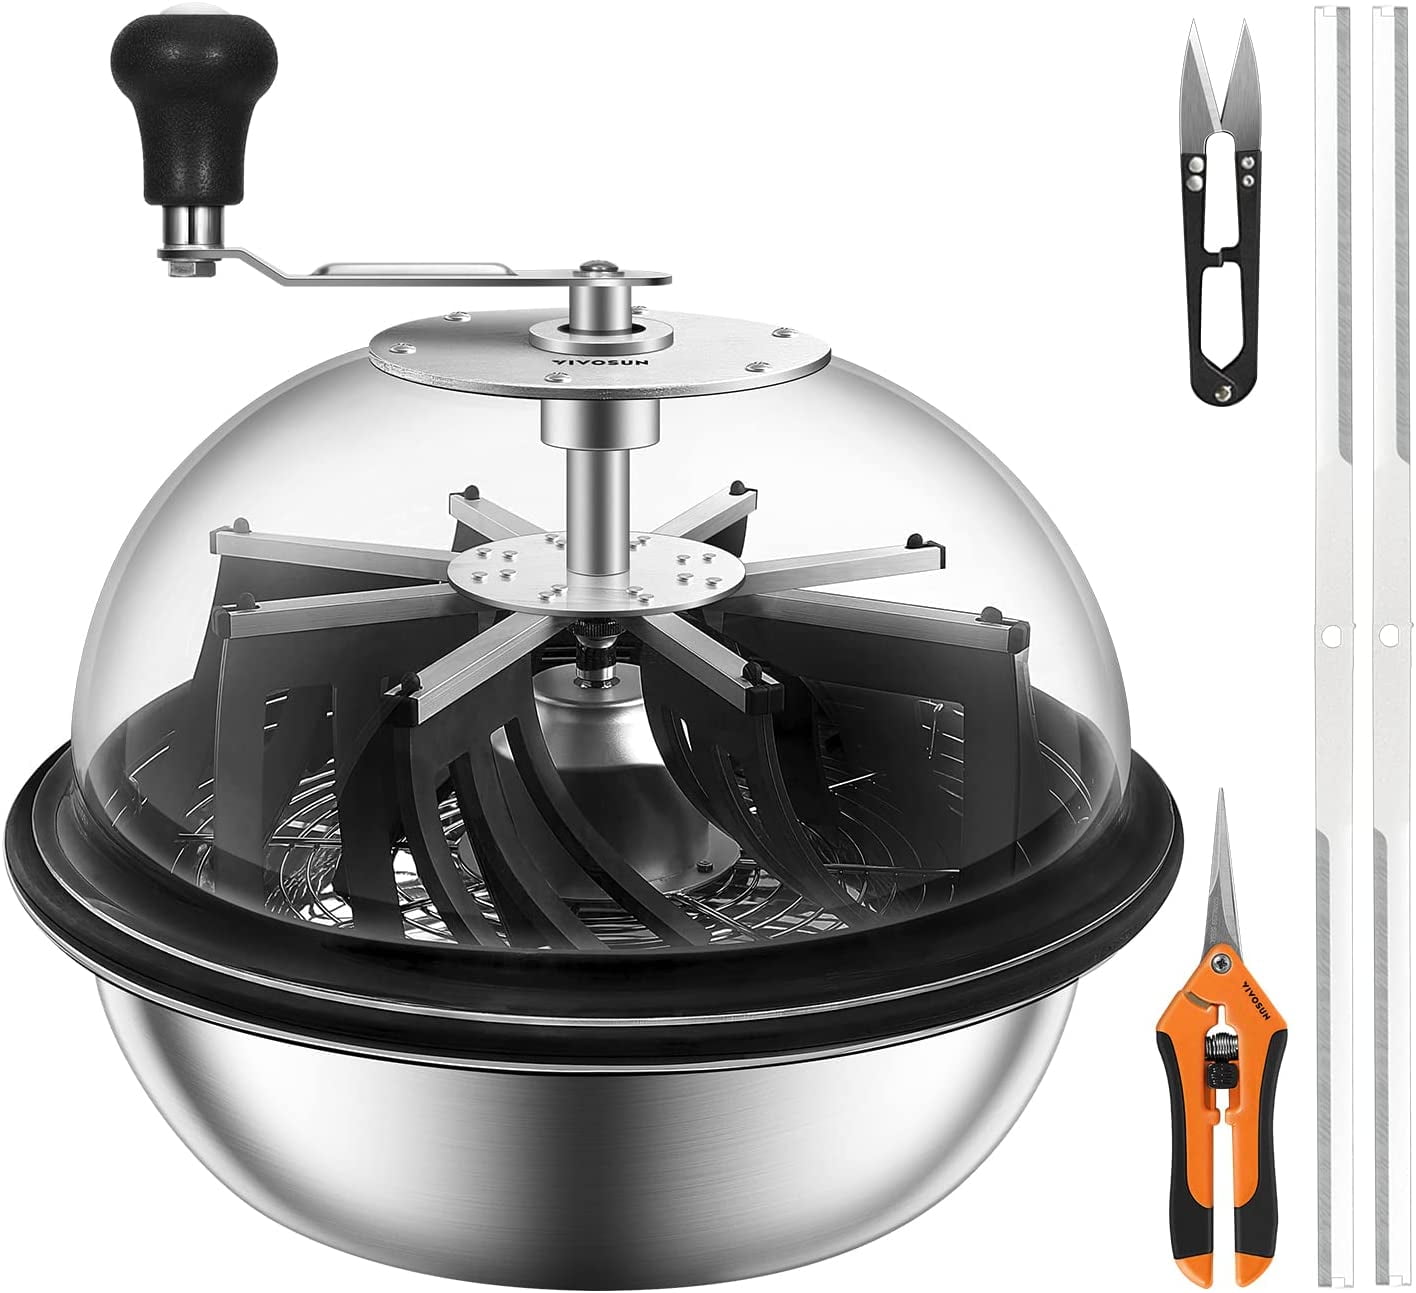 VIVOSUN 16in Bud Leaf Bowl Trimmer with Blades for Spin Metal Gear Box (Upgraded Version) - Walmart.com